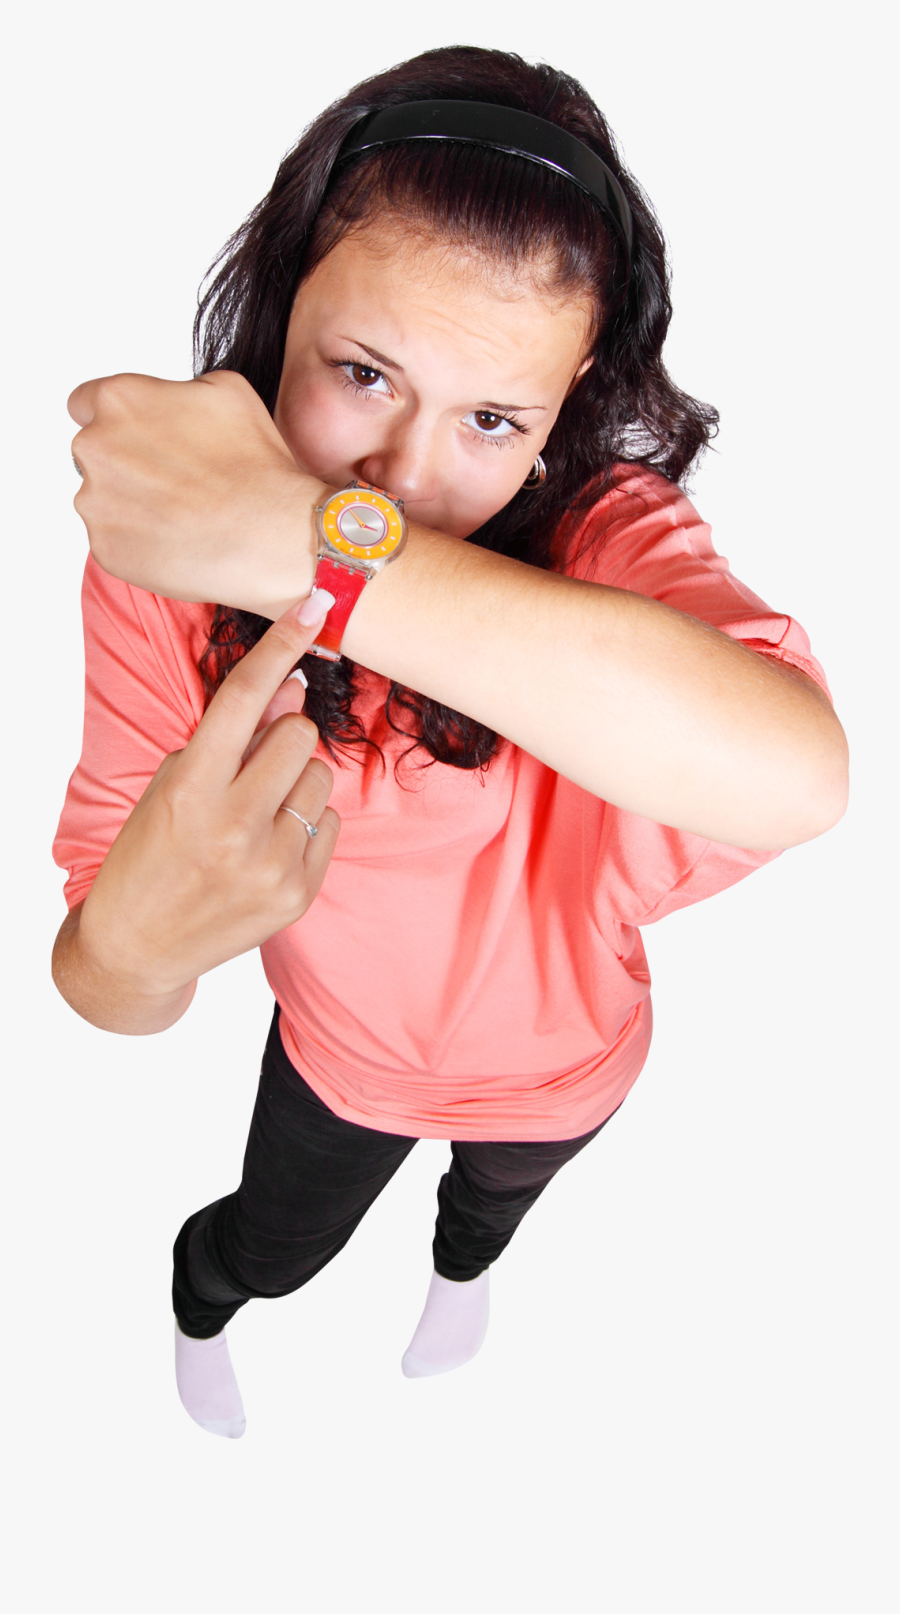 Young Girl Pointing Finger At Her Watch Png Image - Model With Watch Png, Transparent Clipart